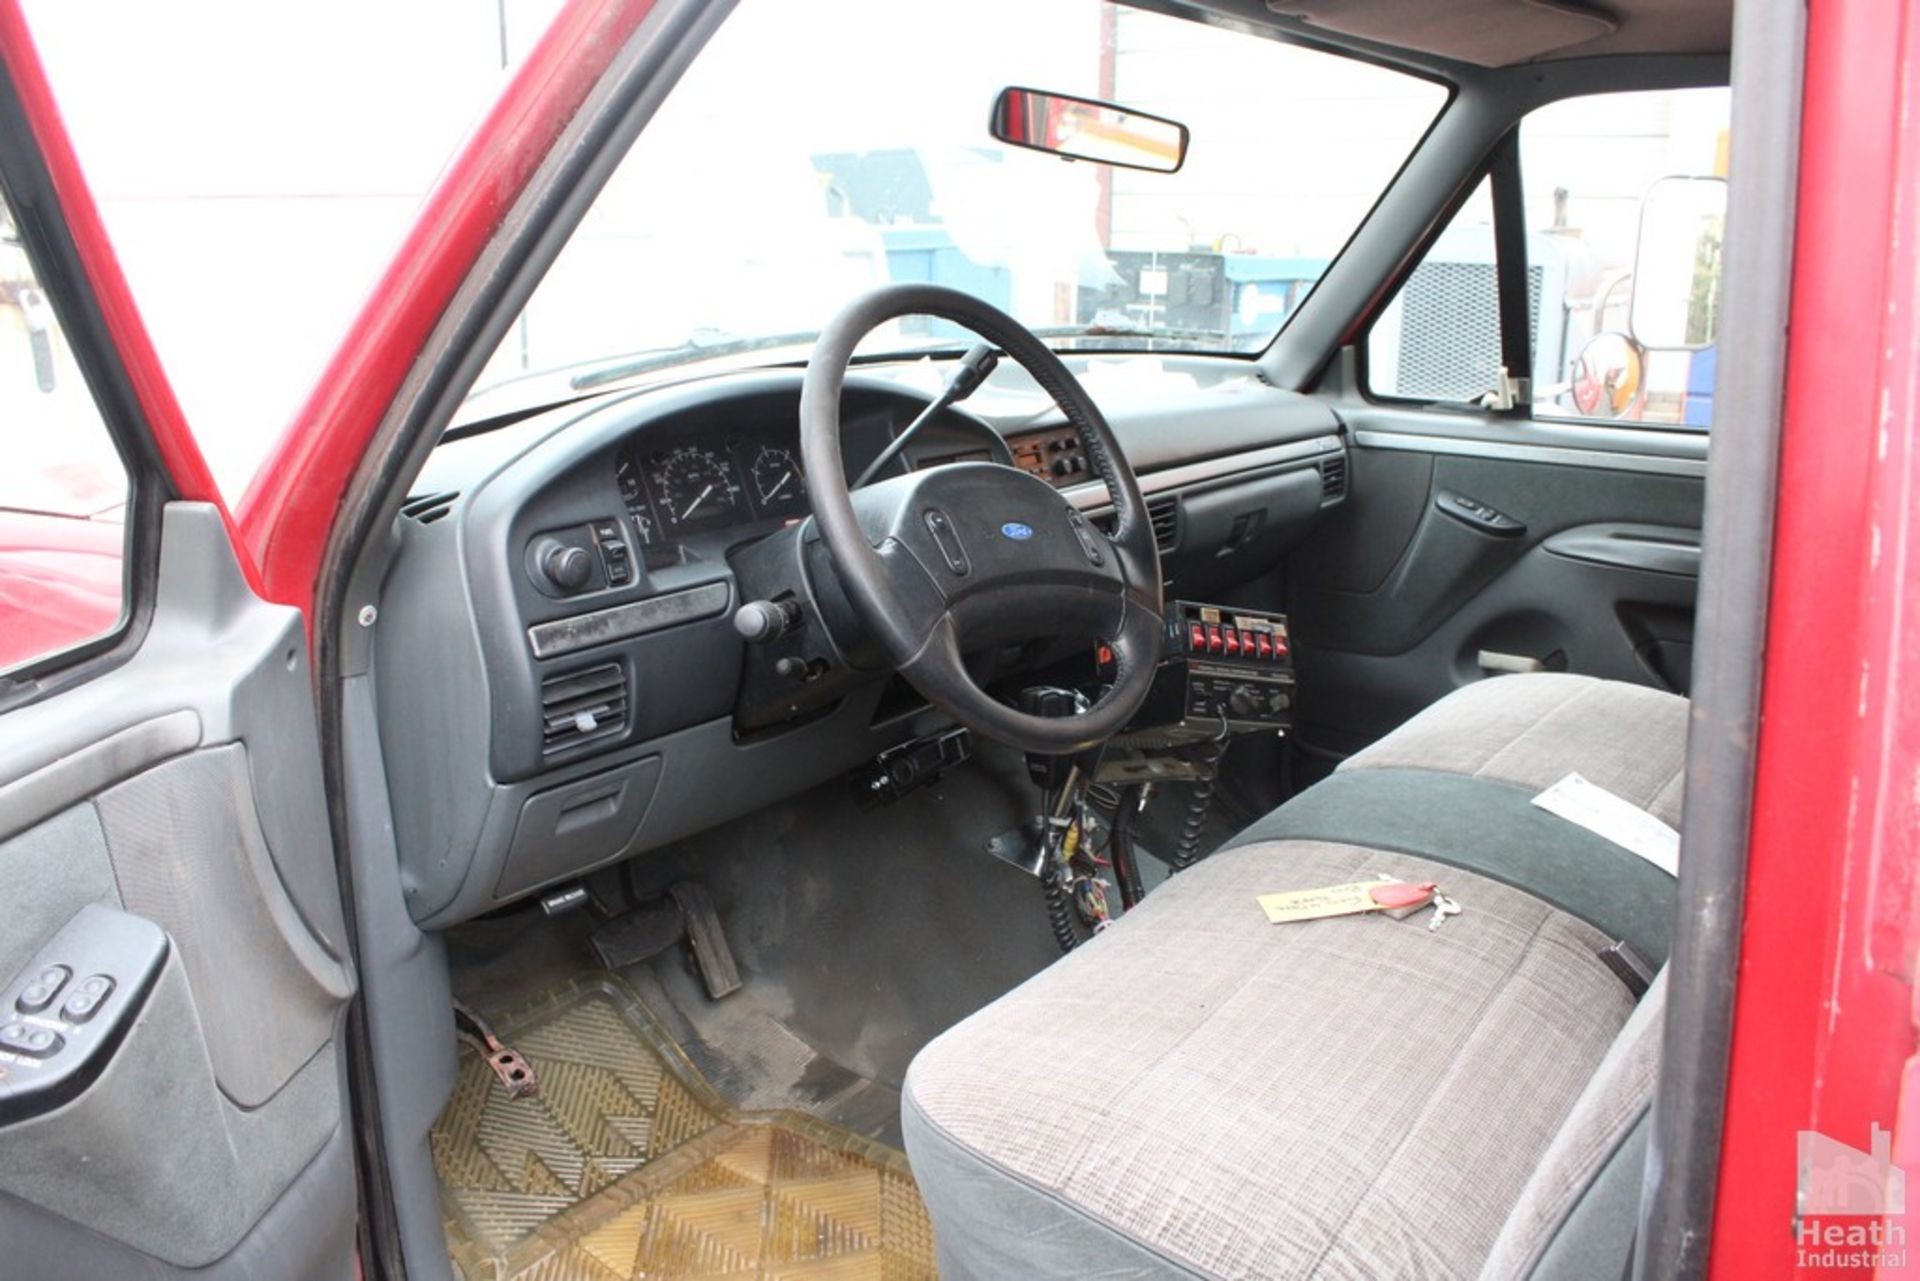 FORD F350 CREW CAB FIFTH WHEEL TOTER | GAS |CB RADIO | VIN 2FTJW35M2NCA25224 (1992) | INDICATED - Image 4 of 7